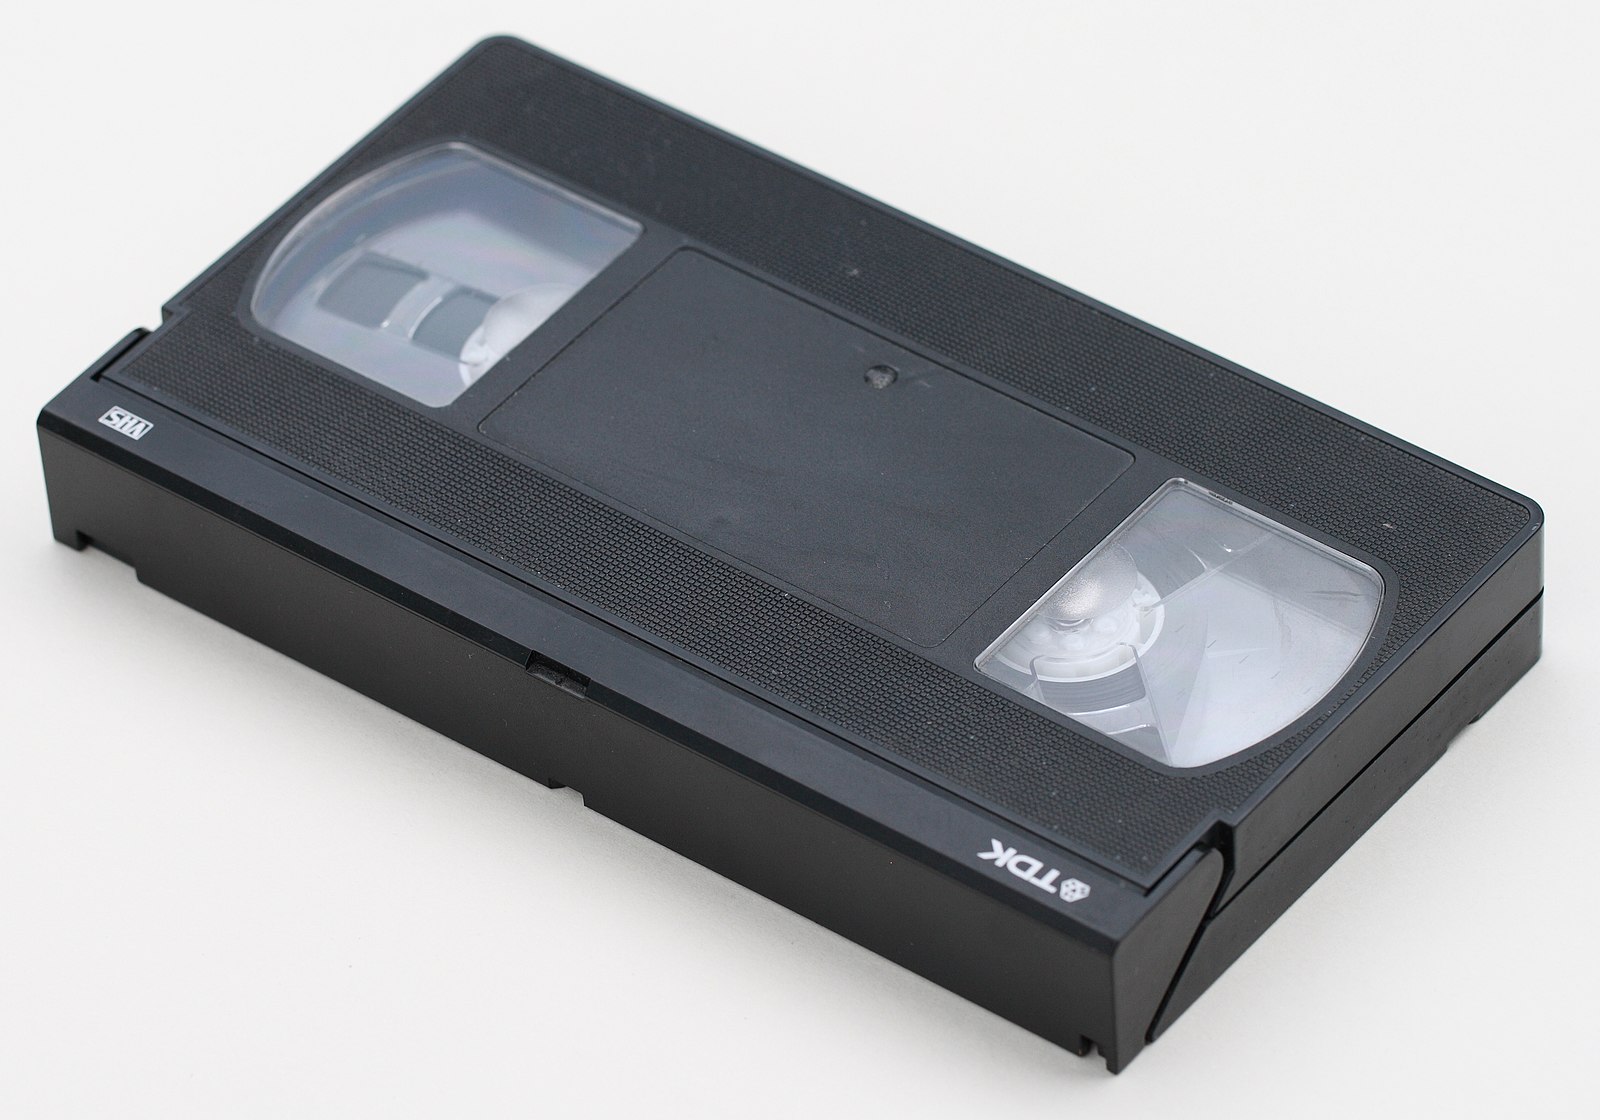 A photo of a VHS videocassette tape from Wikipedia